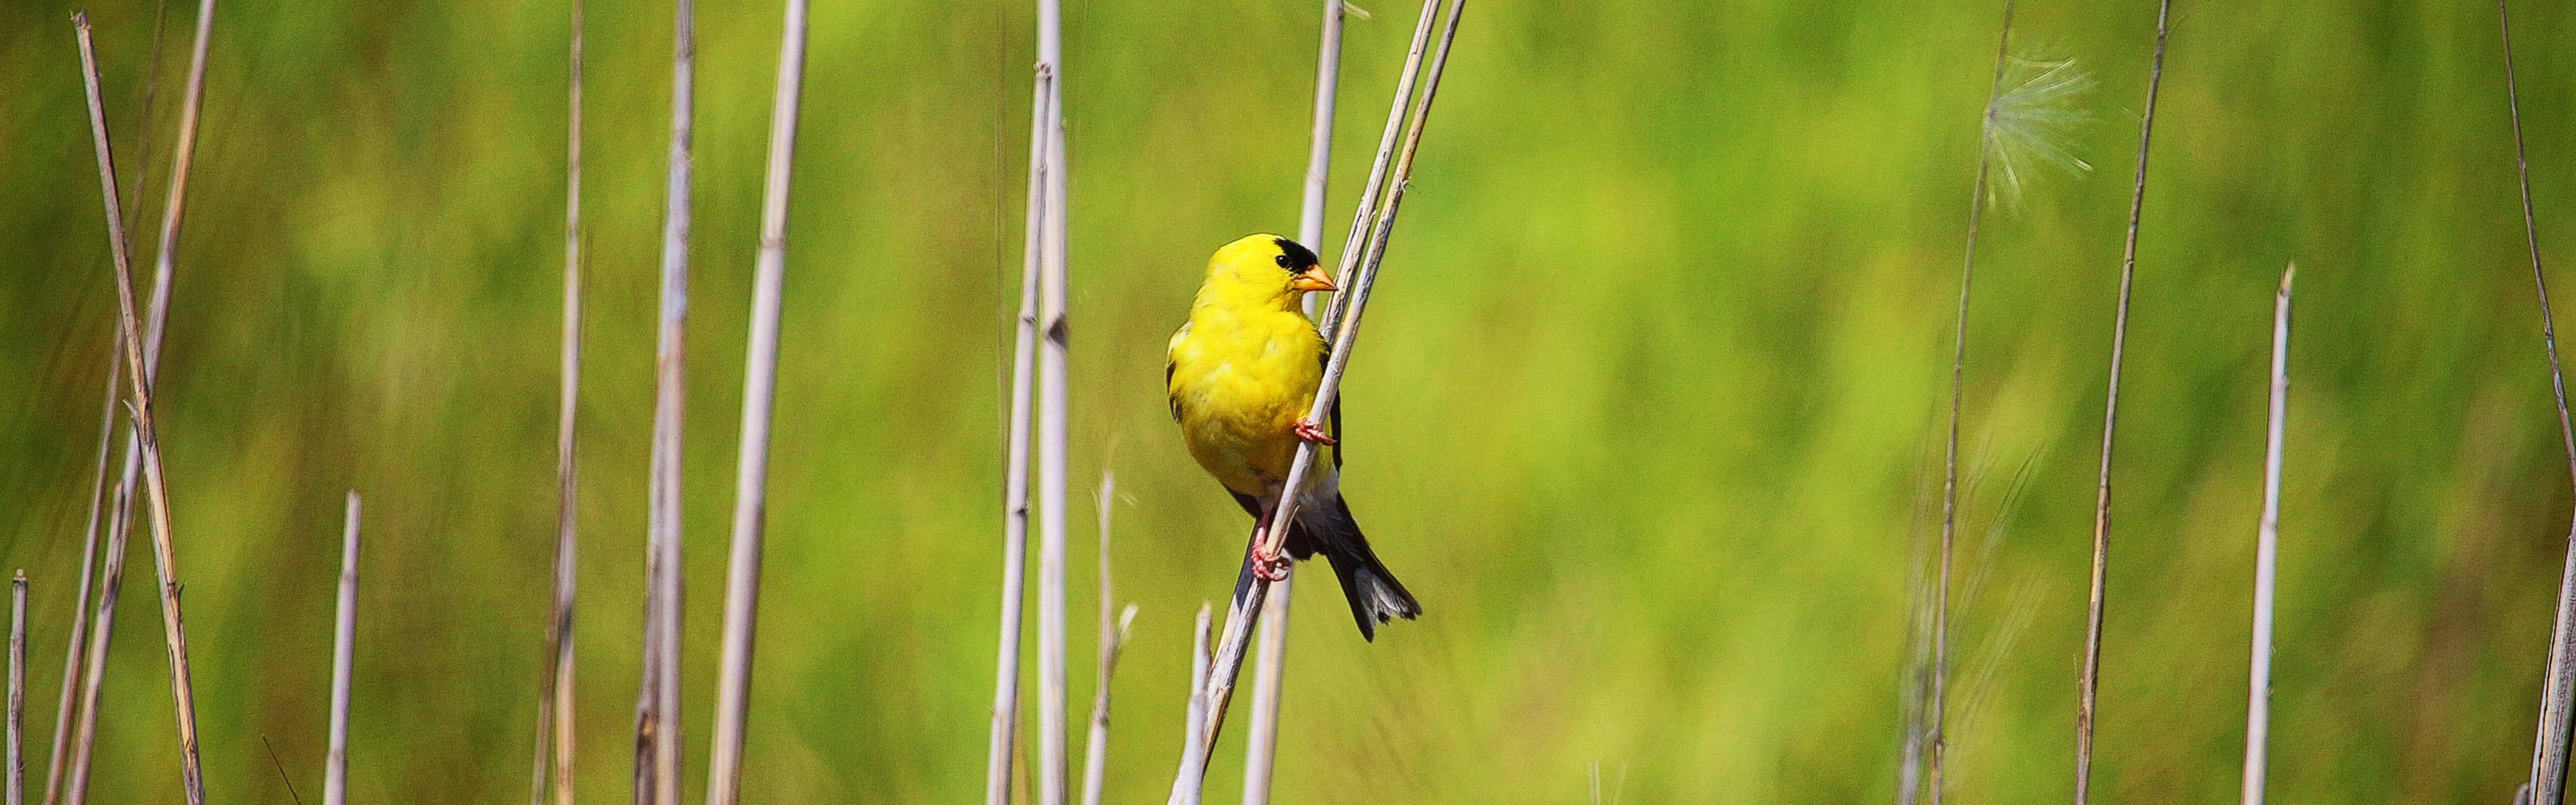 A yellow bird with a black face perches on a slender stalk of dry marsh grass.